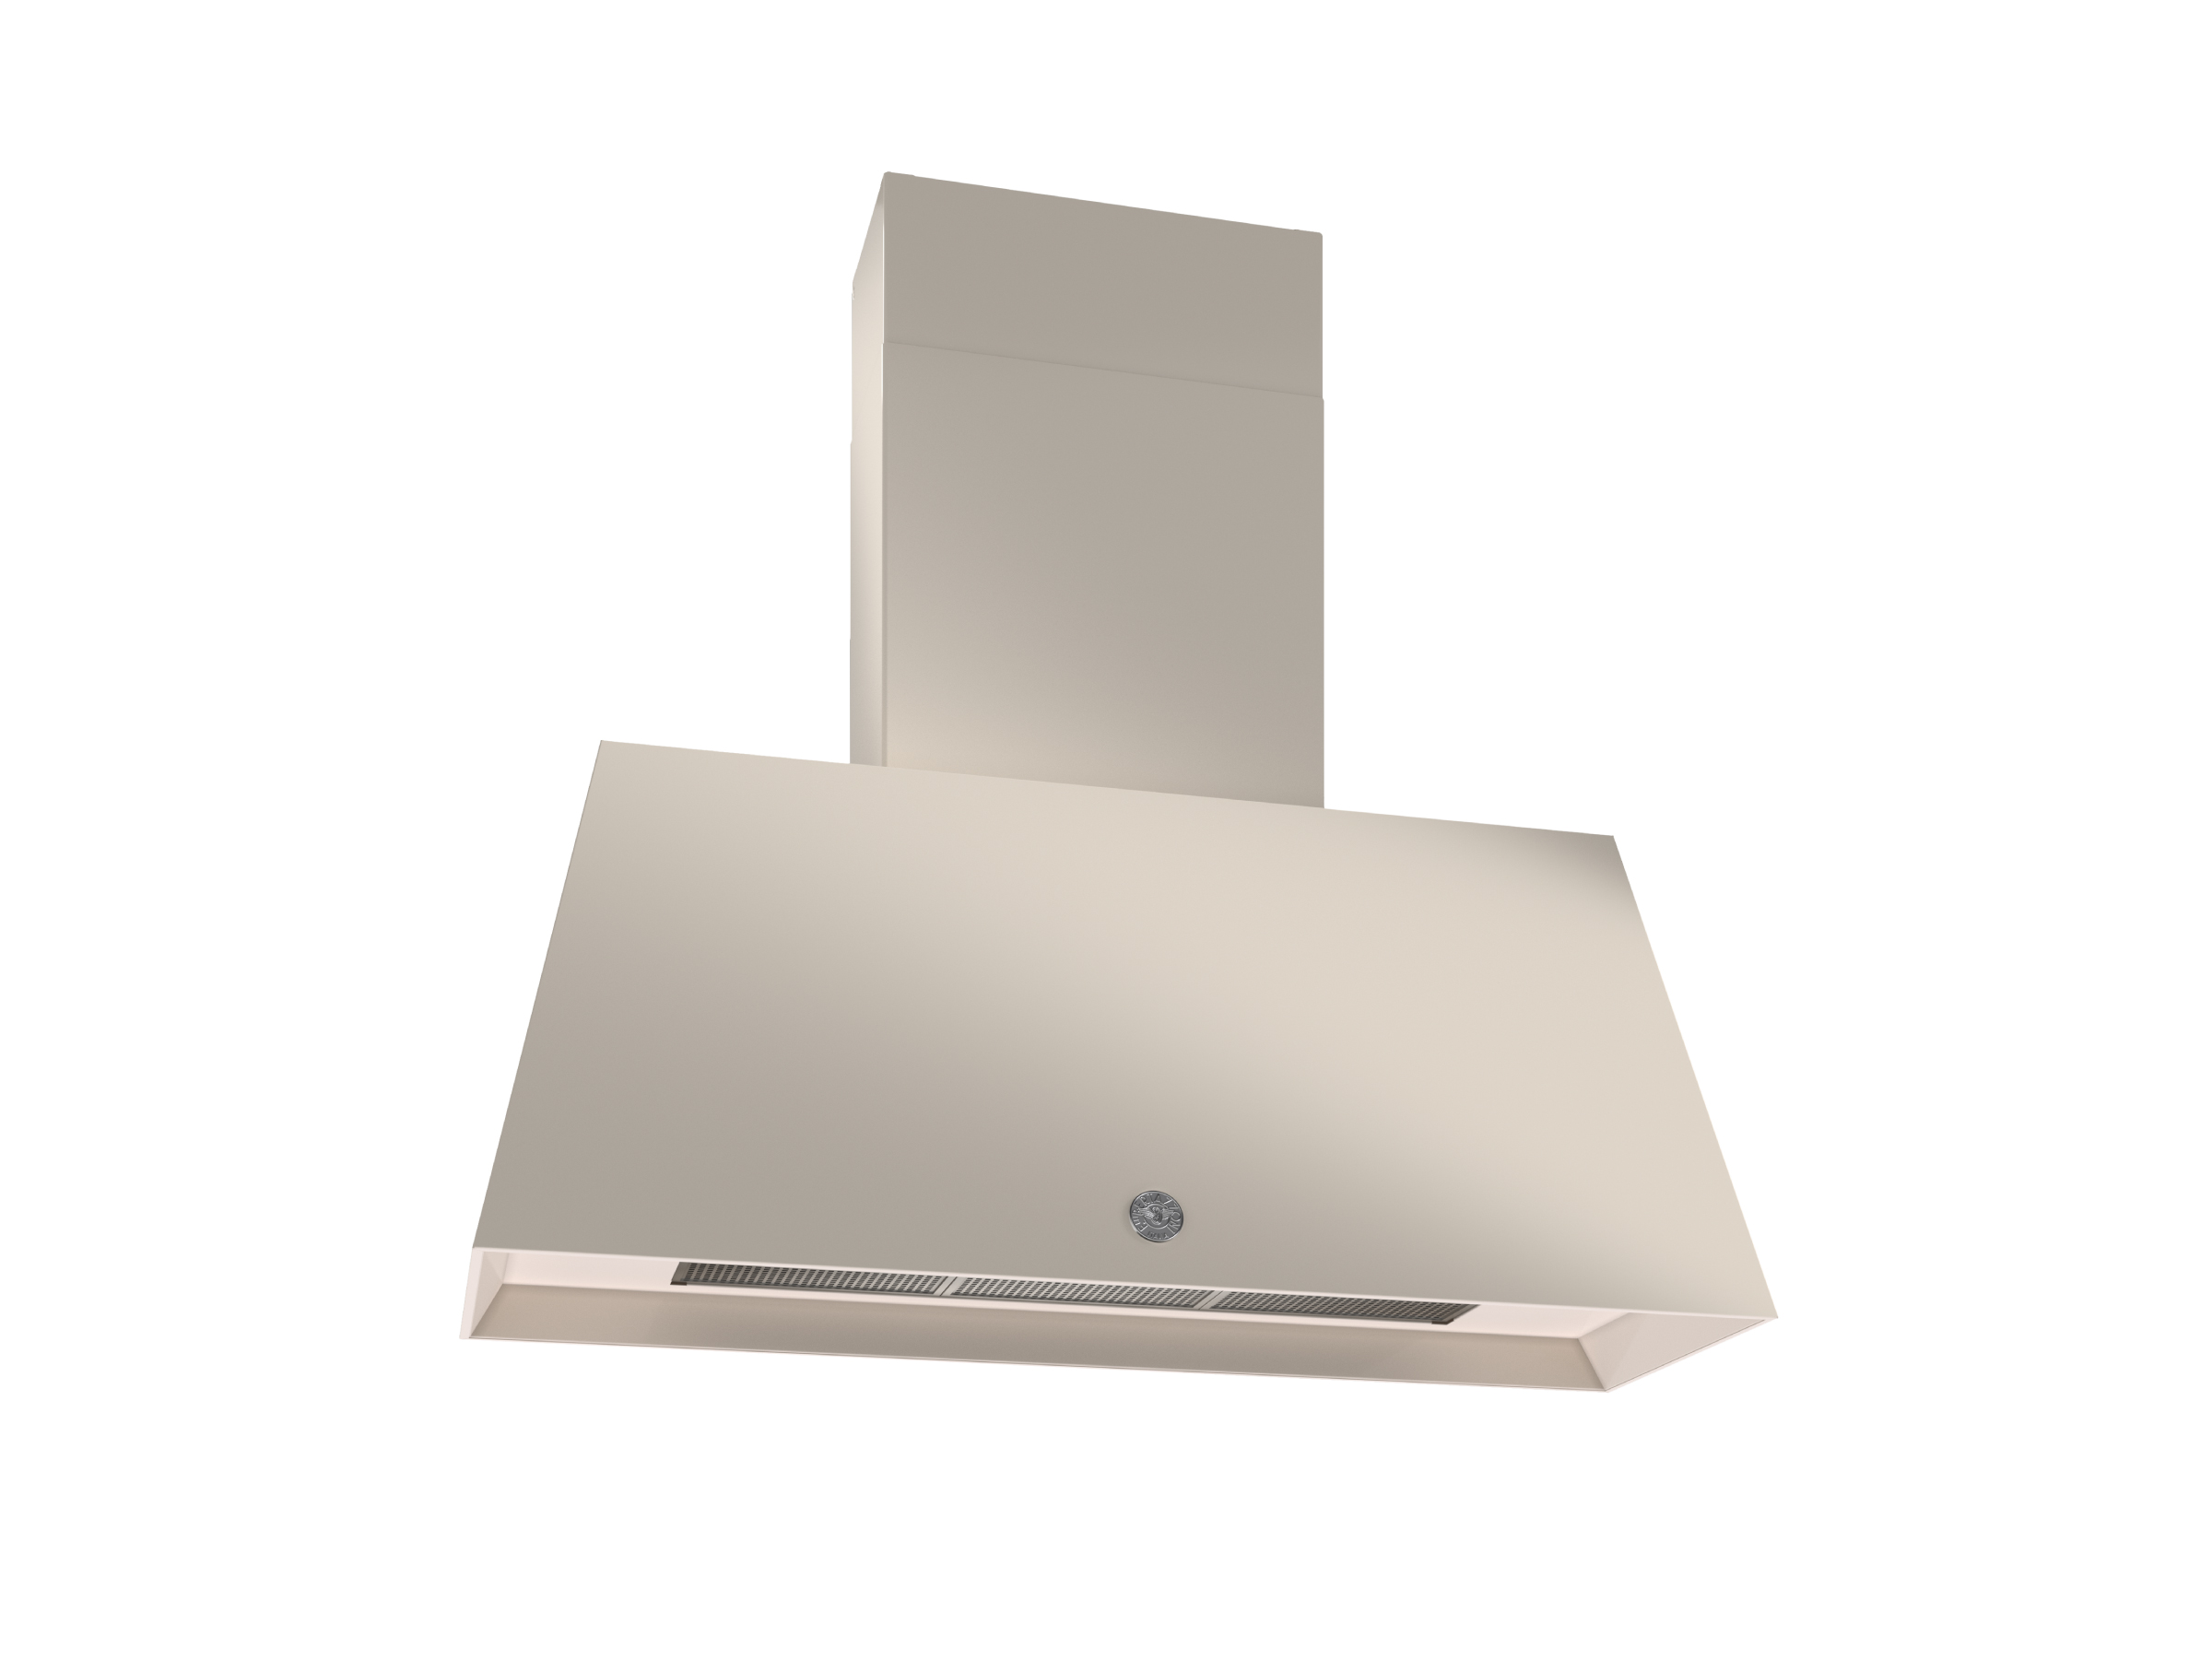 Compact Desktop Bertazzoni Cooker Hood For Low Noise Household Cooking  Ideal For Hot Pot And Barbecue Companion From Zhenghzouaiyao002, $233.98